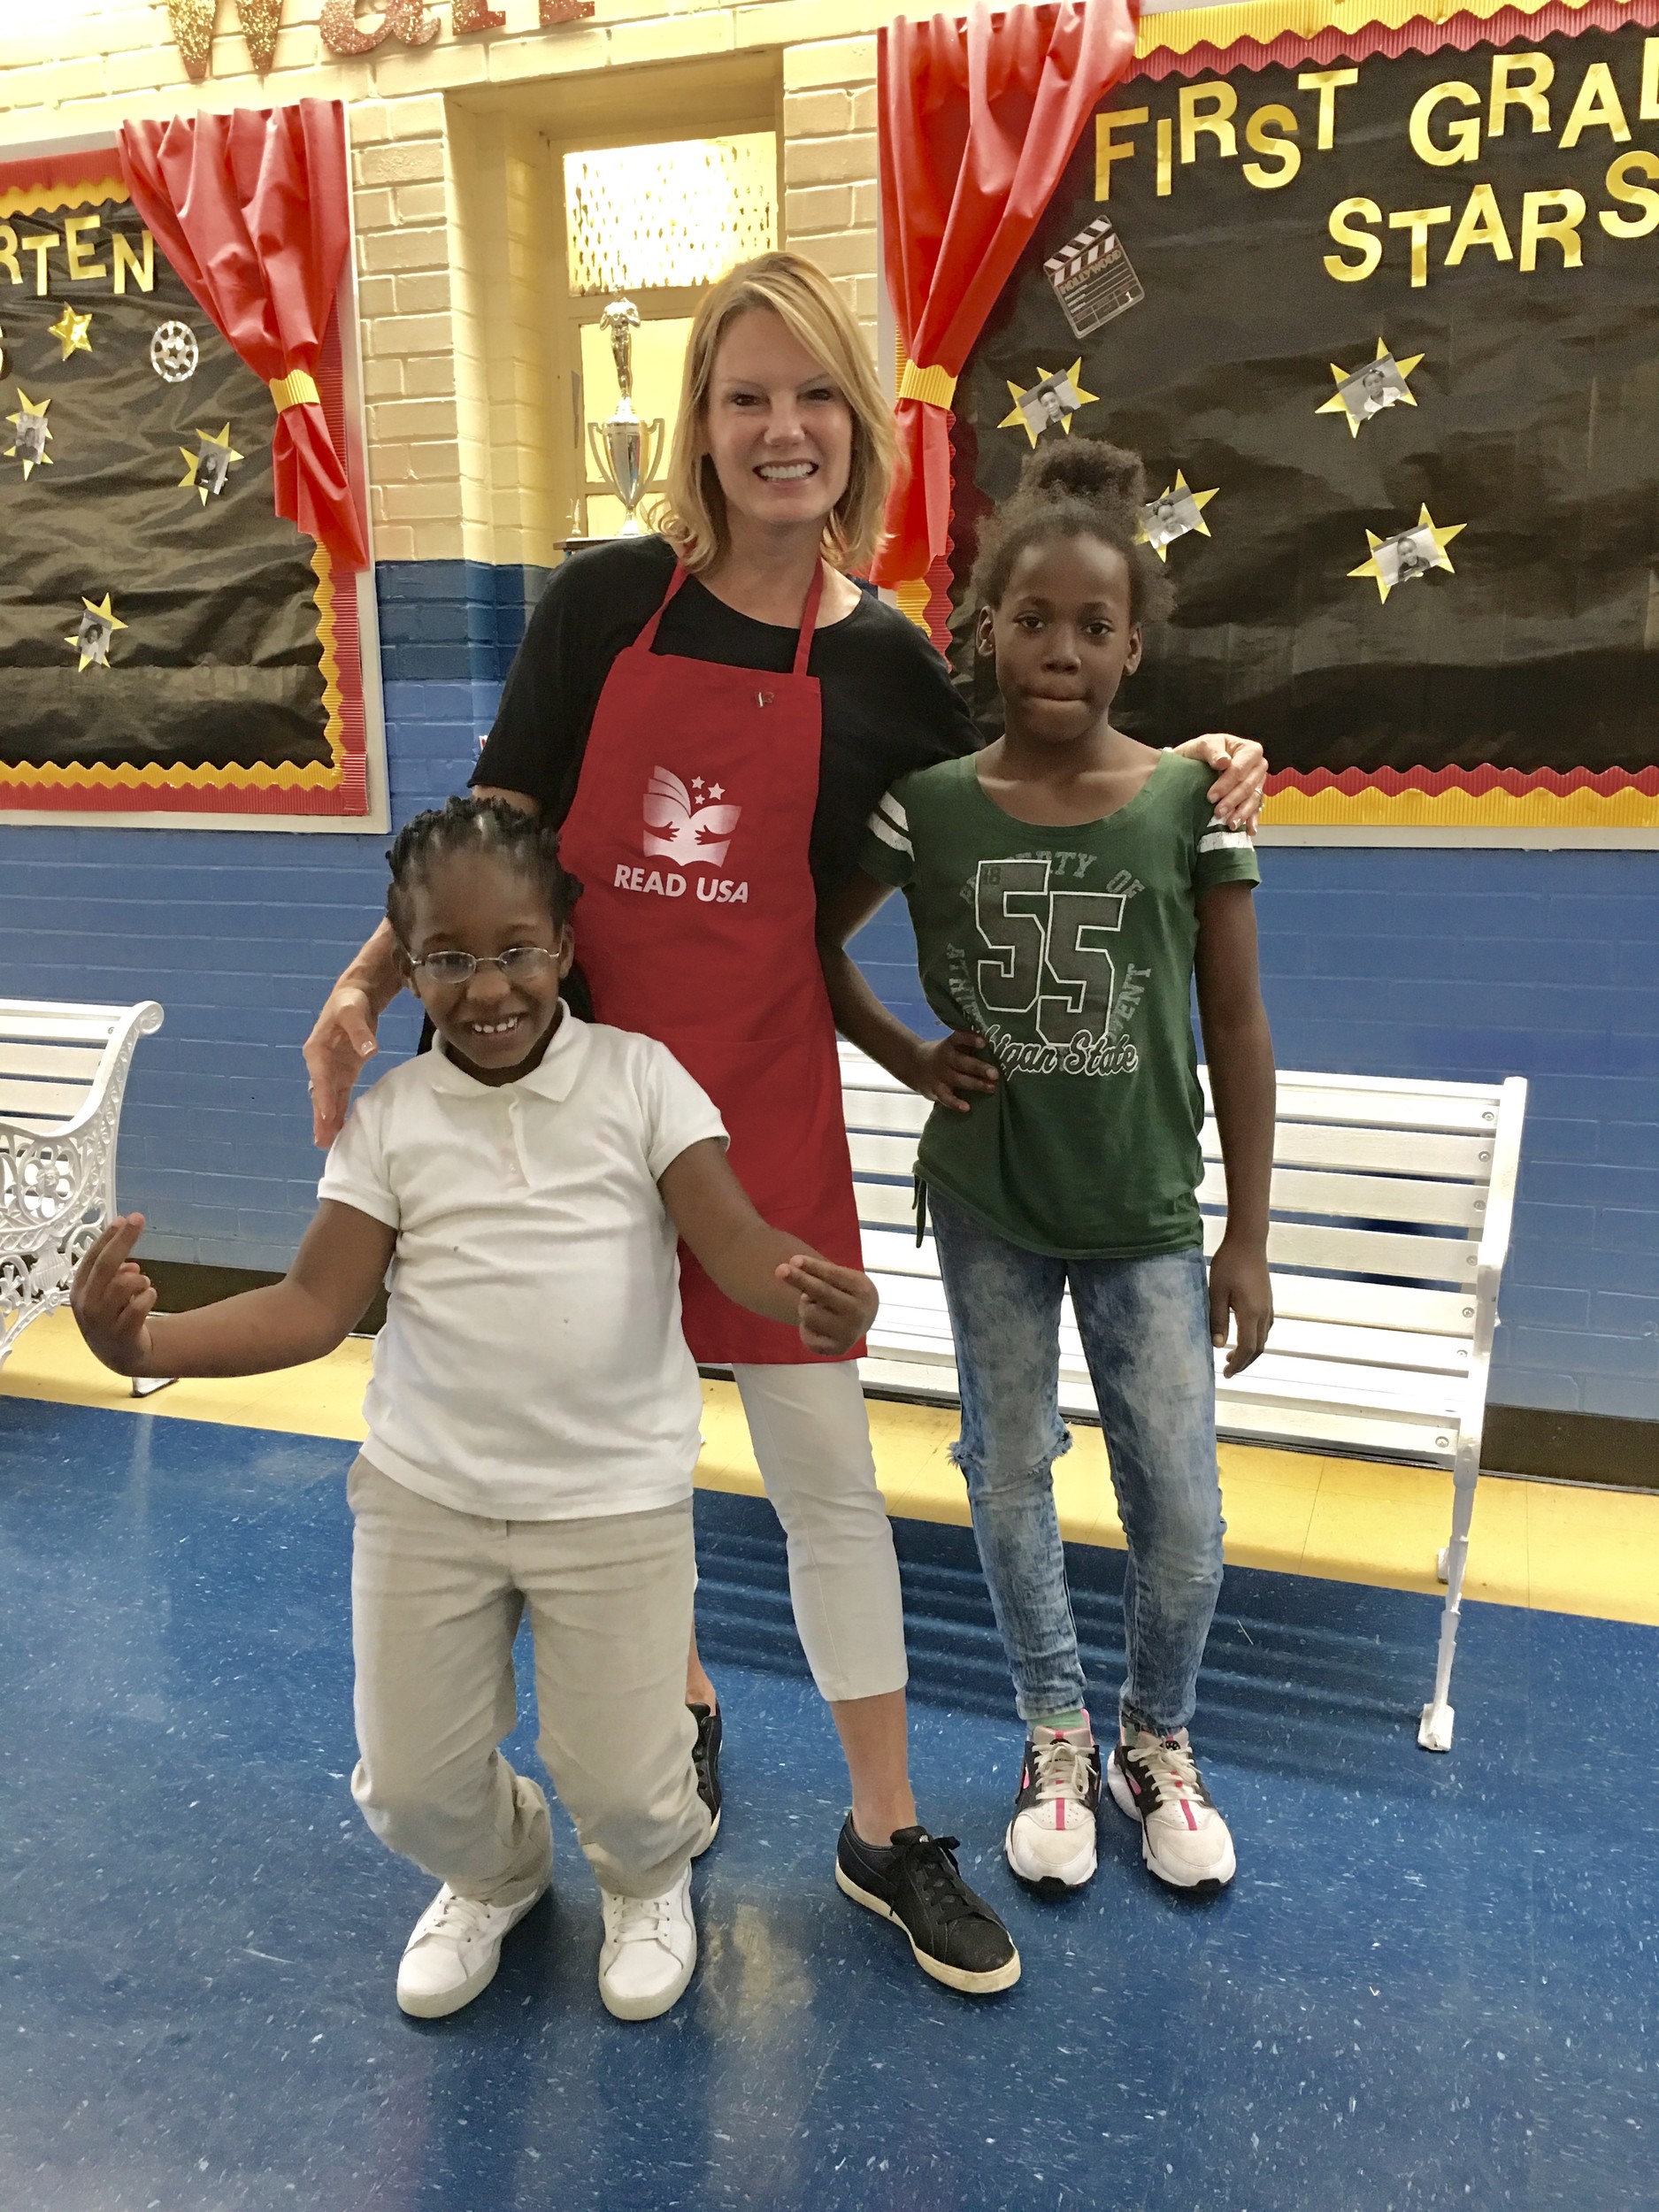 Ellen Wiss gathers with SP Livingston Elementary School students Amarciona Ferguson and Melia Mitchell at a Read USA book fair.